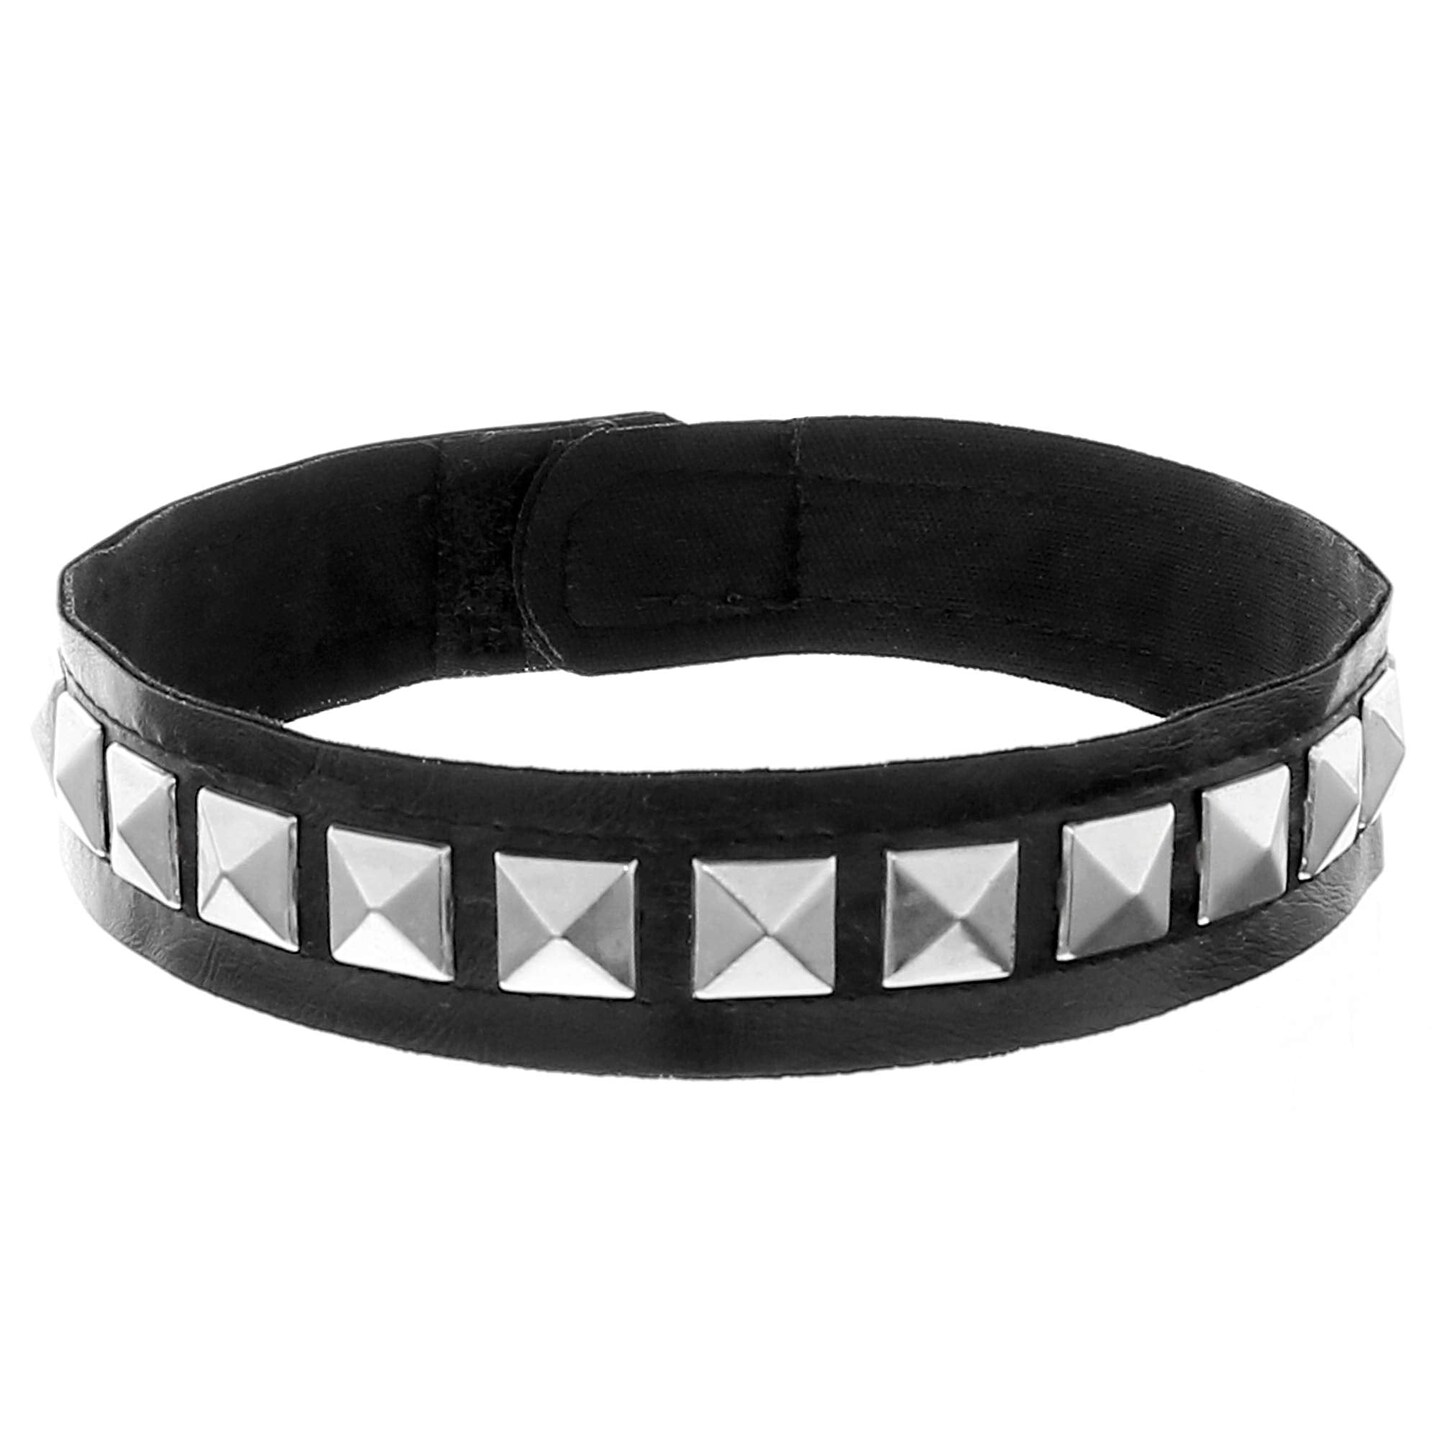 Gothic Accessories Necklace, Spiked Leather Punk Choker